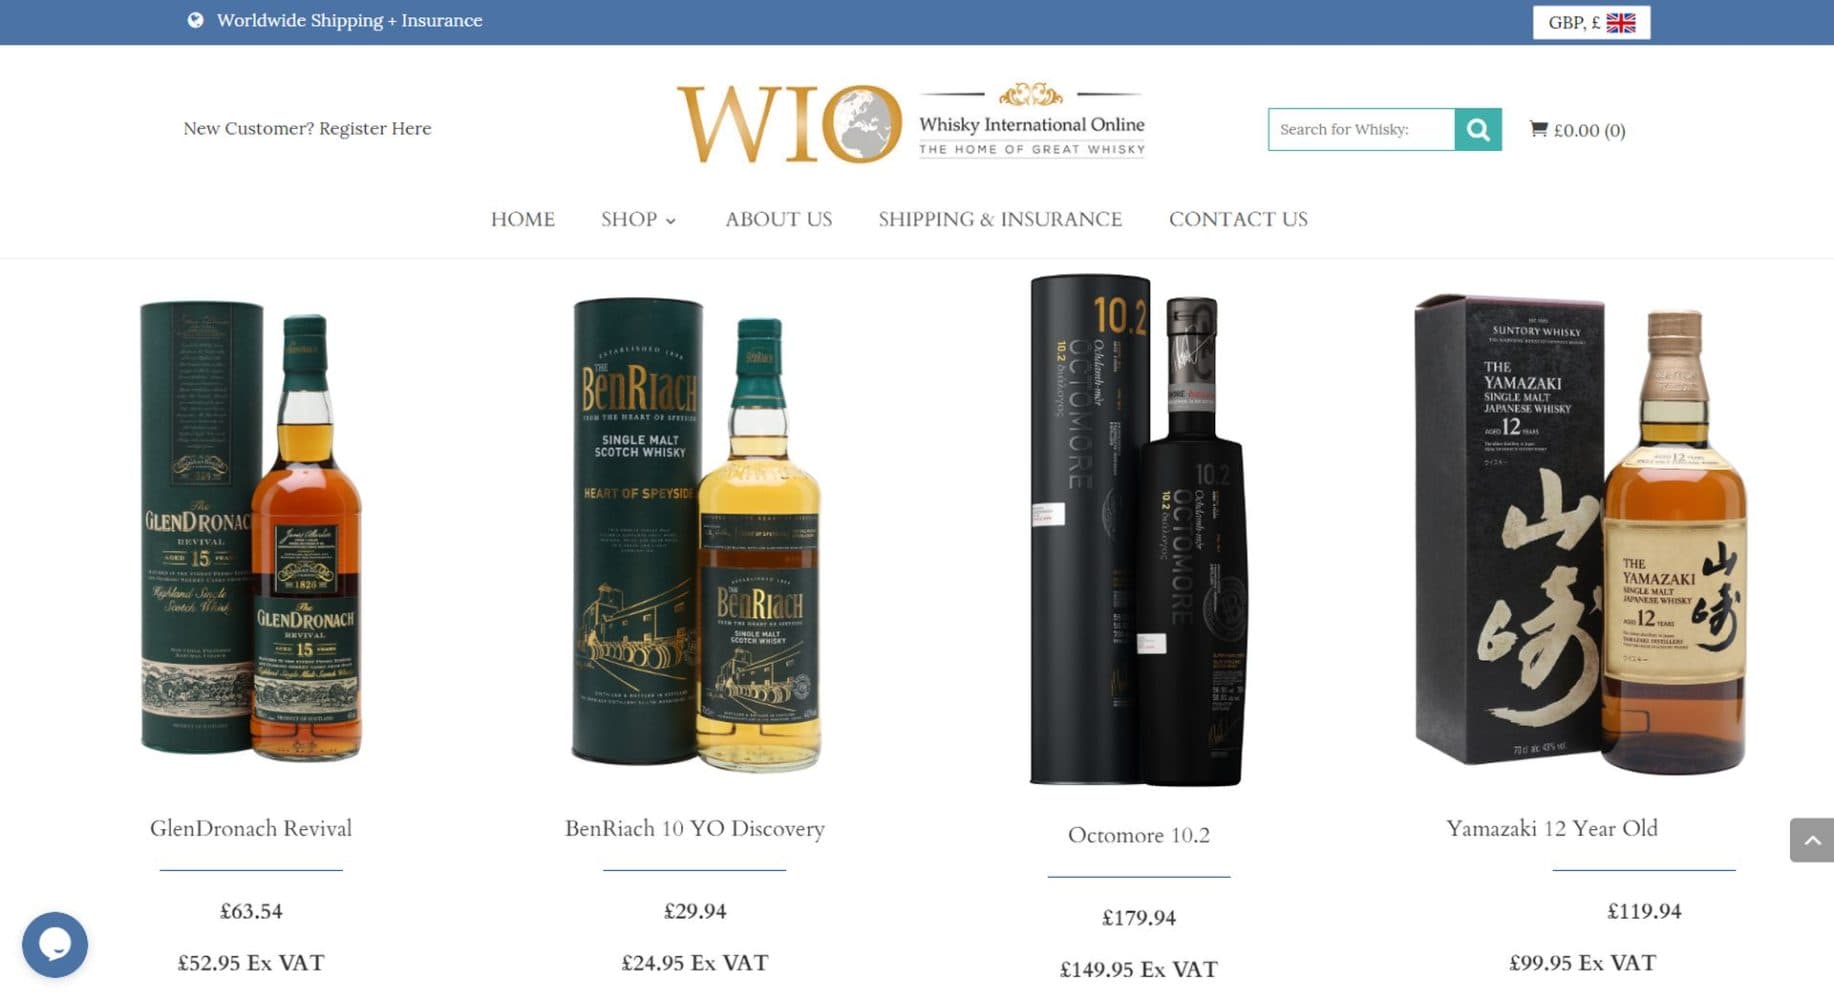 Whisky International Online Product